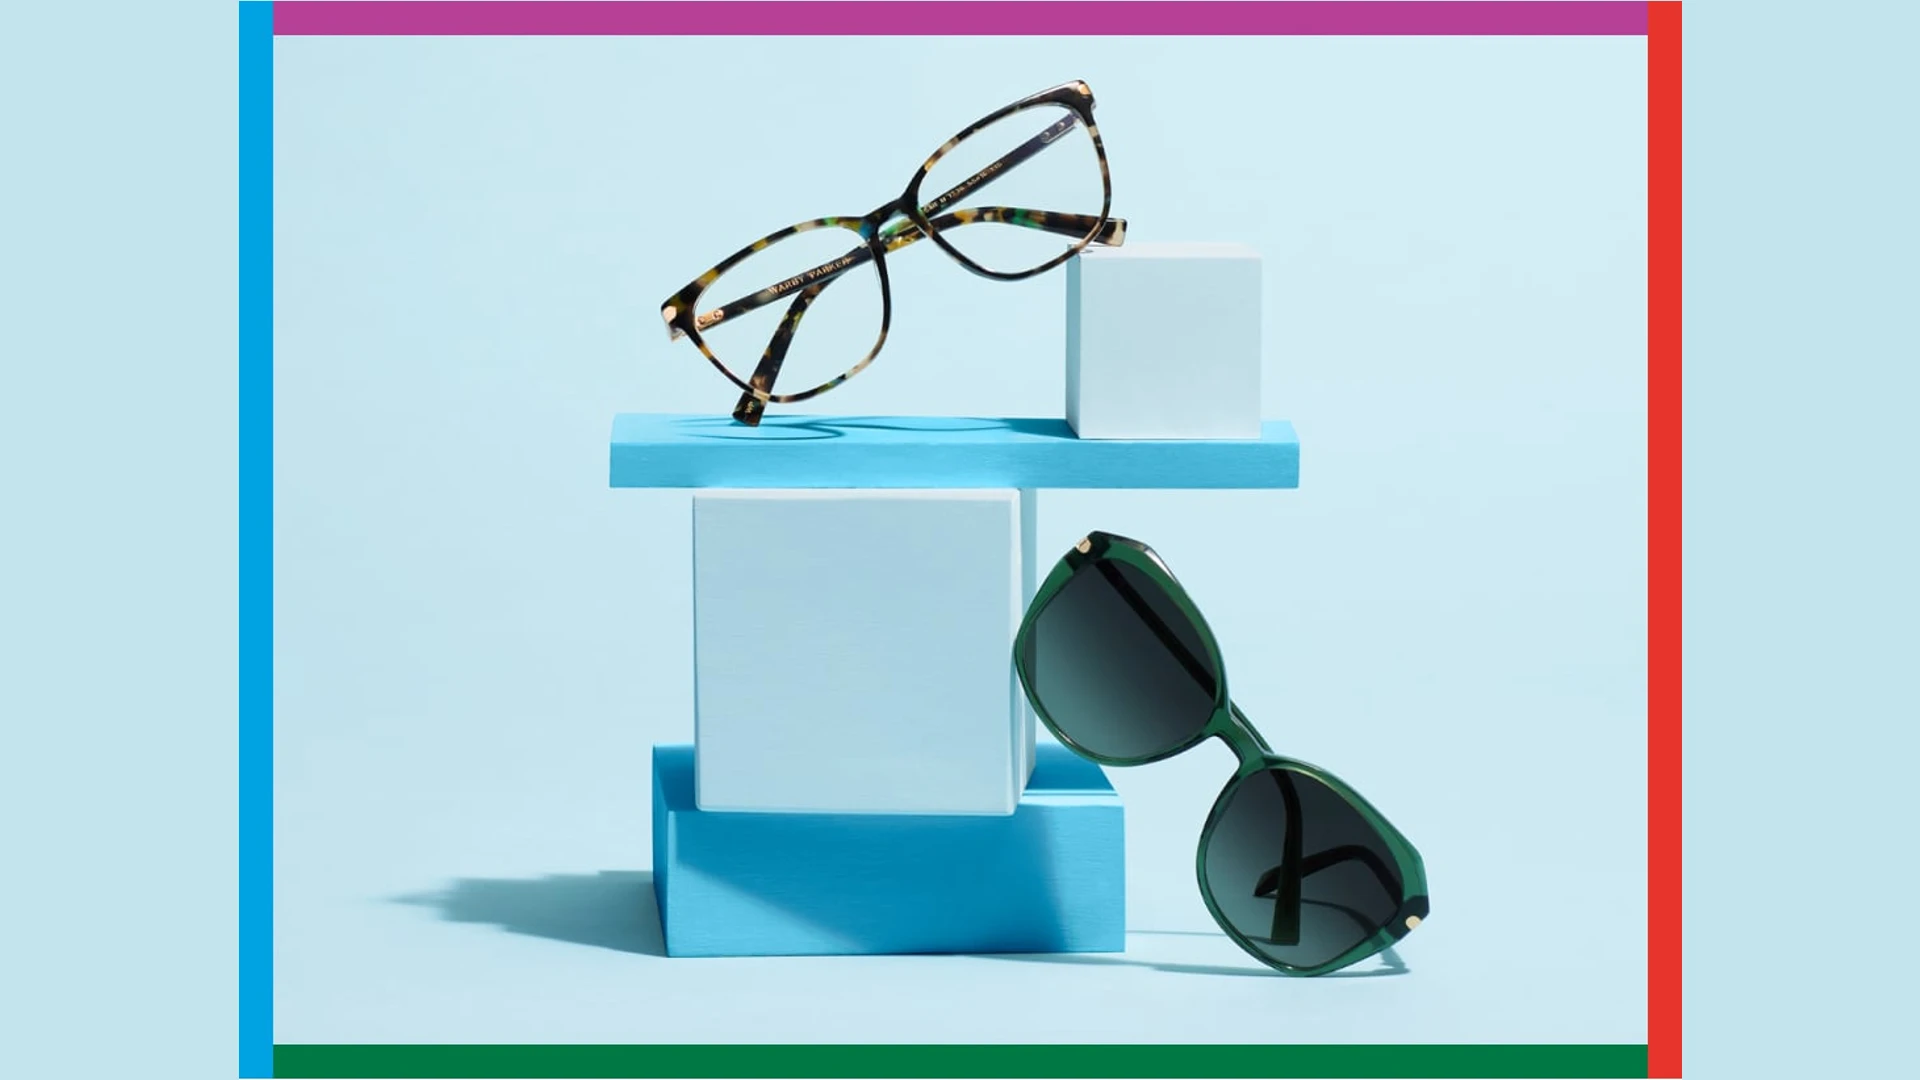 Warby Parker Coupon Codes